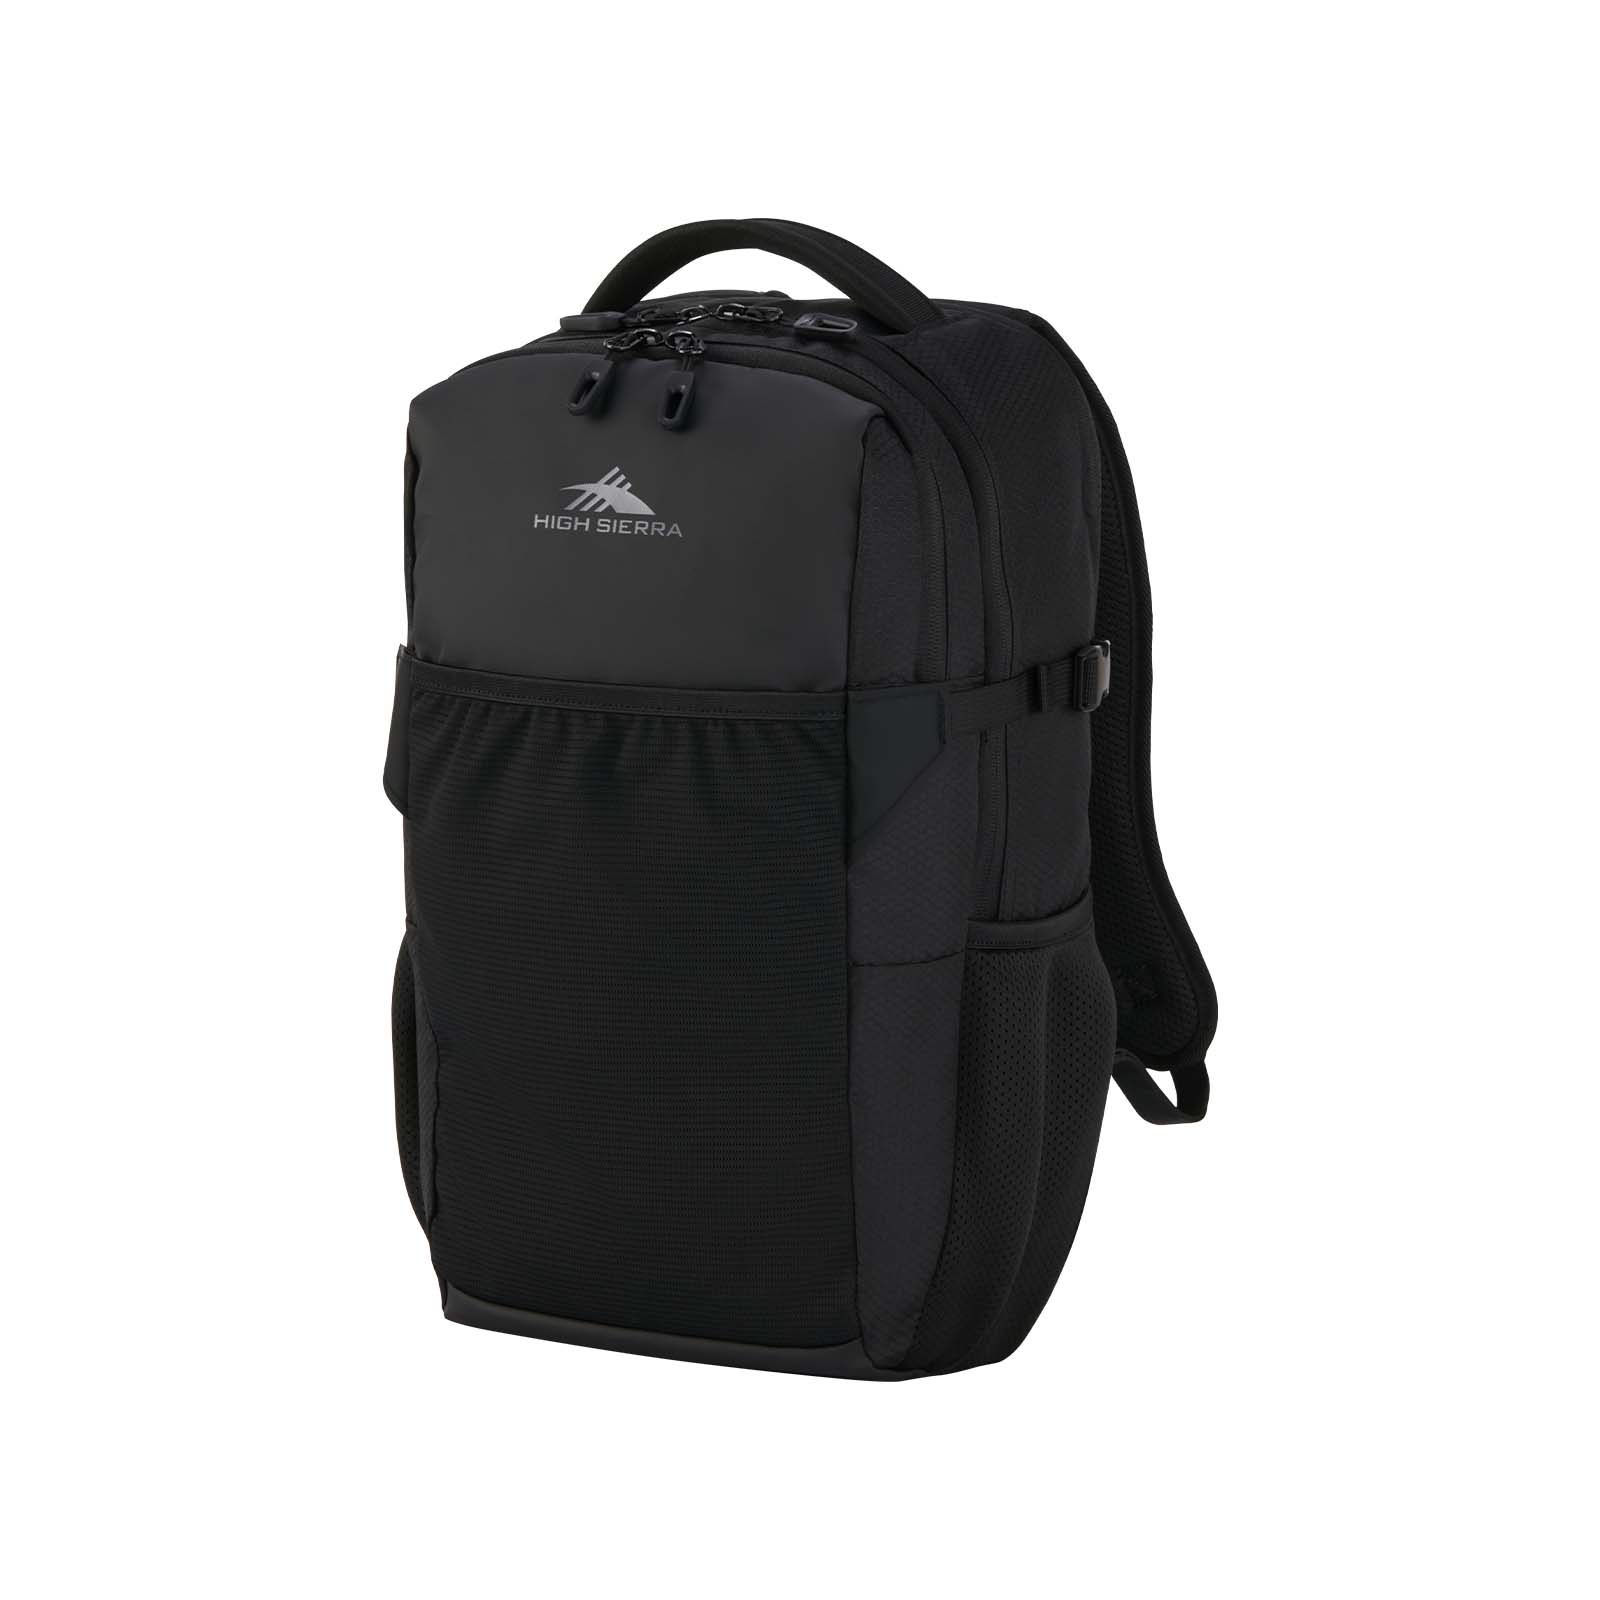 High-Sierra-Crossover-15-Inch-Laptop-Backpack-Black-Front-Angle